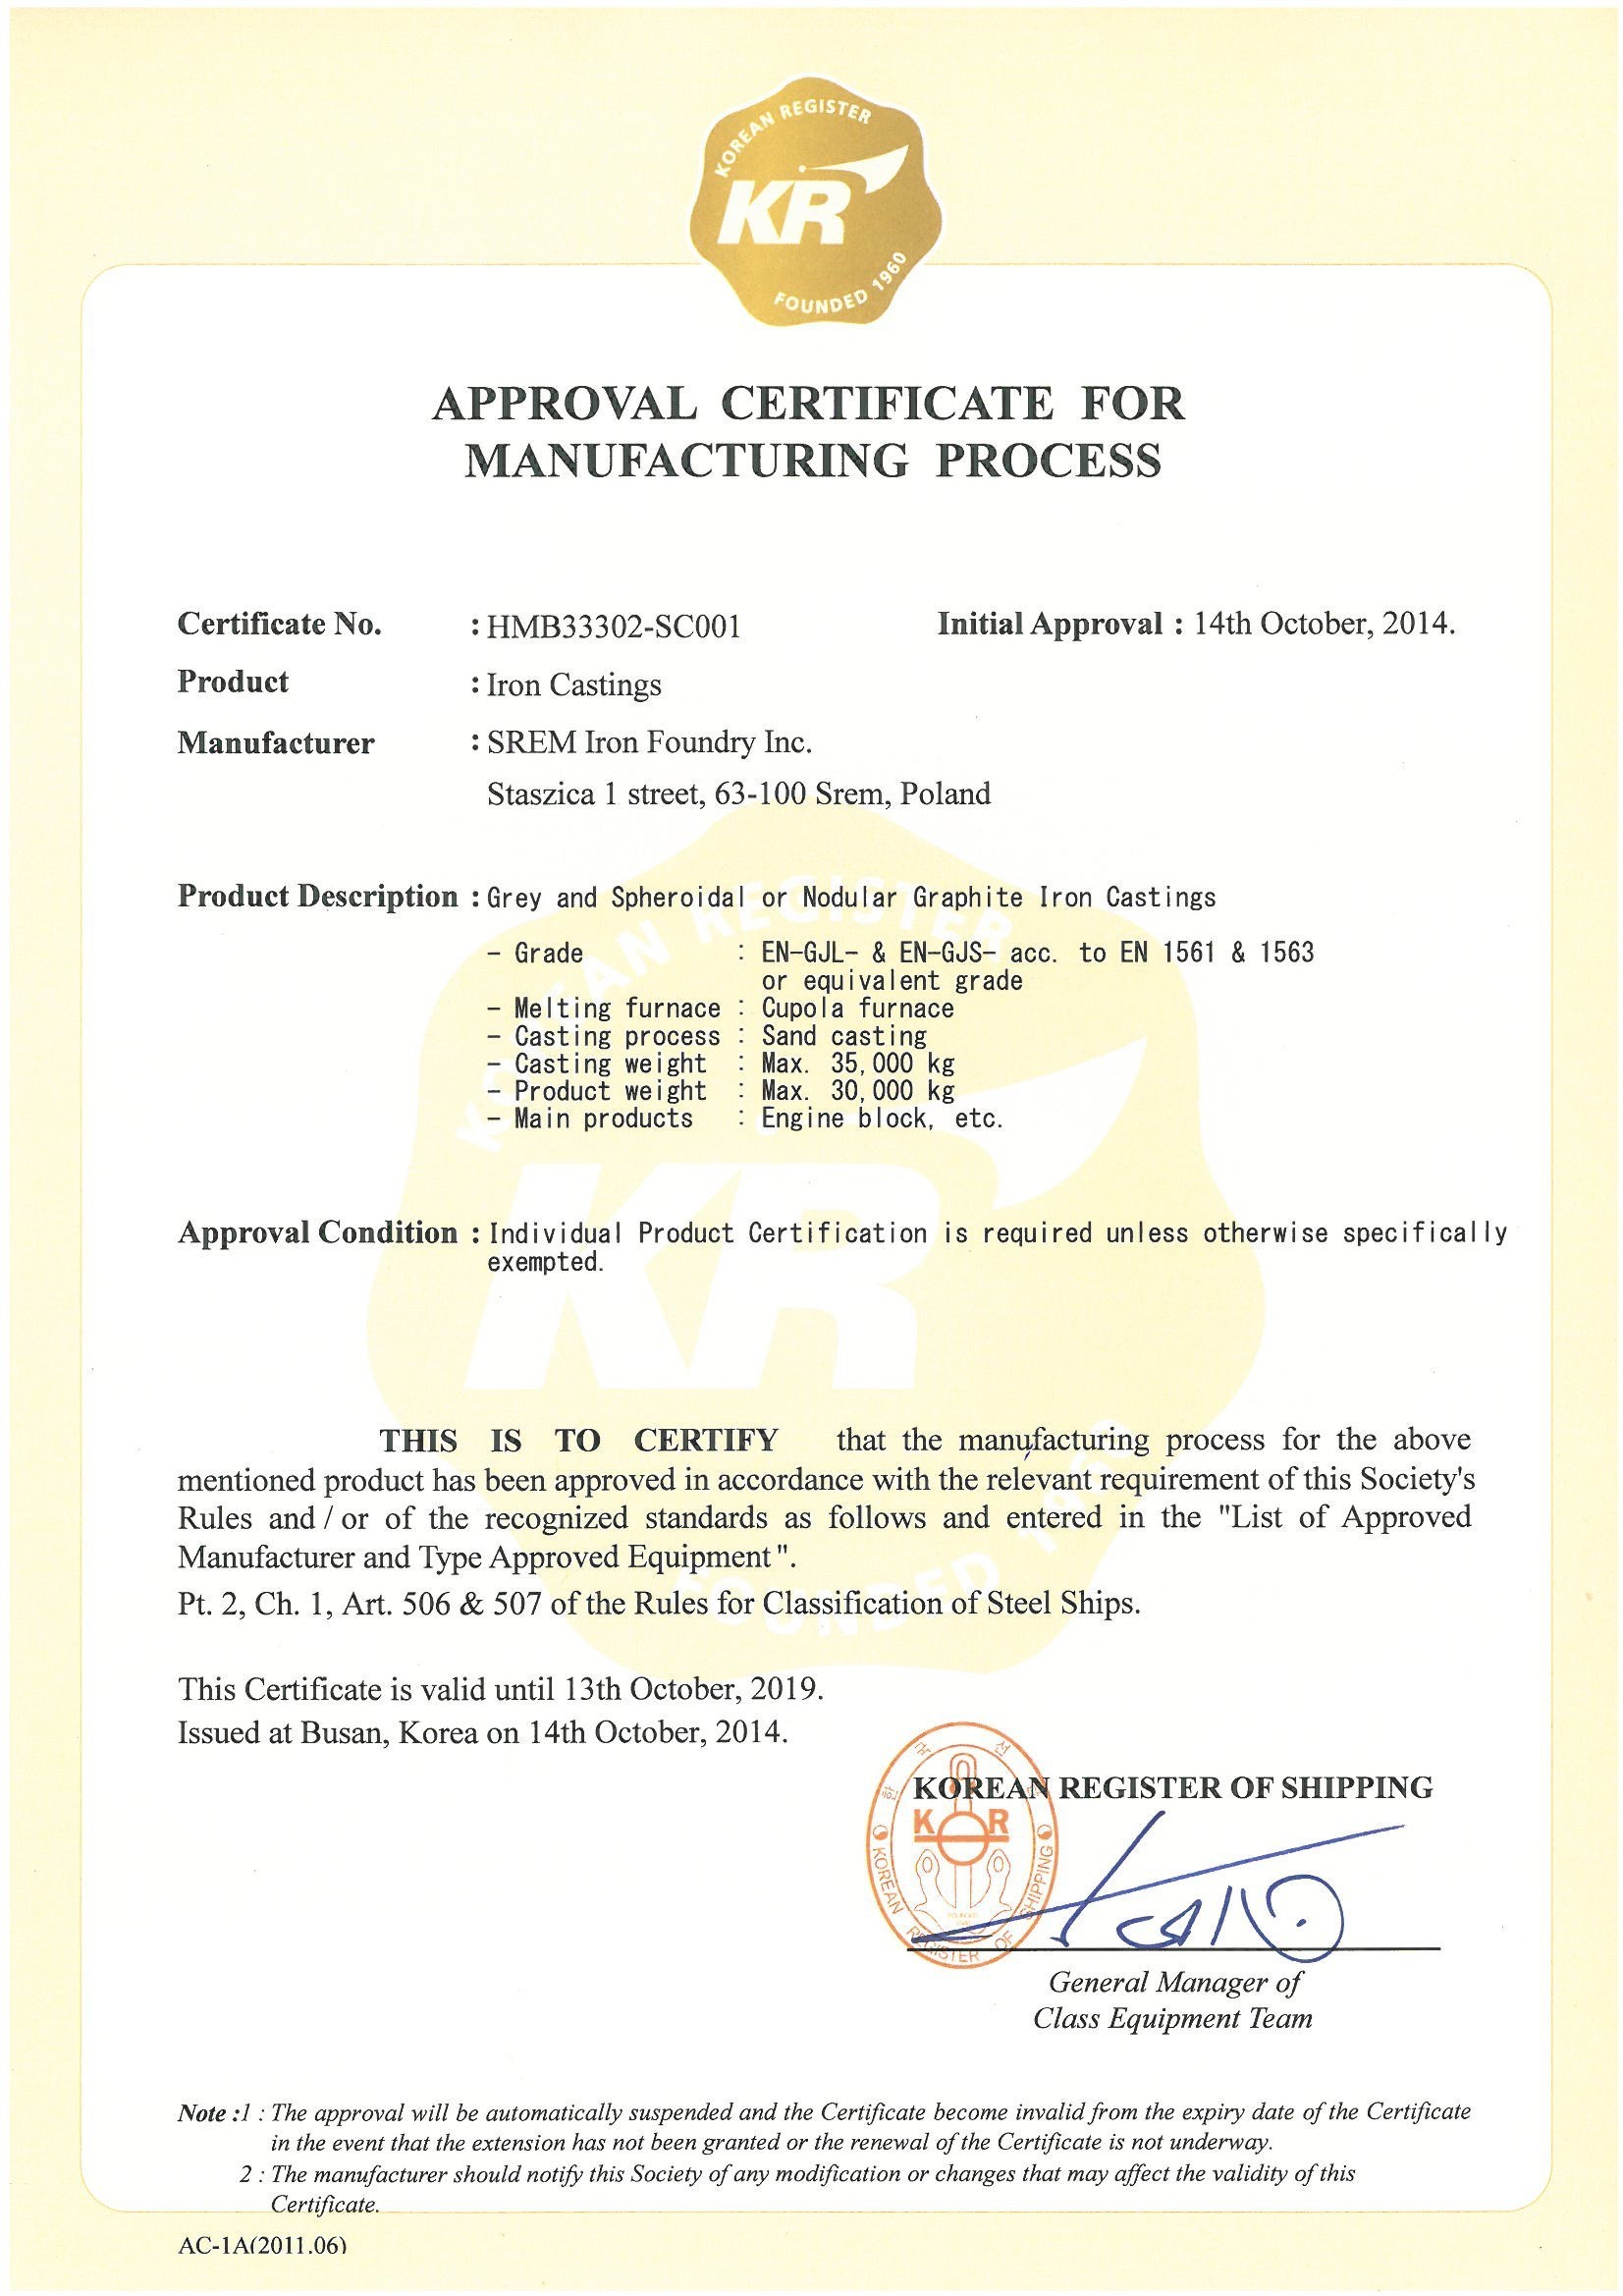 Approval Certificate for Manufacturing Process